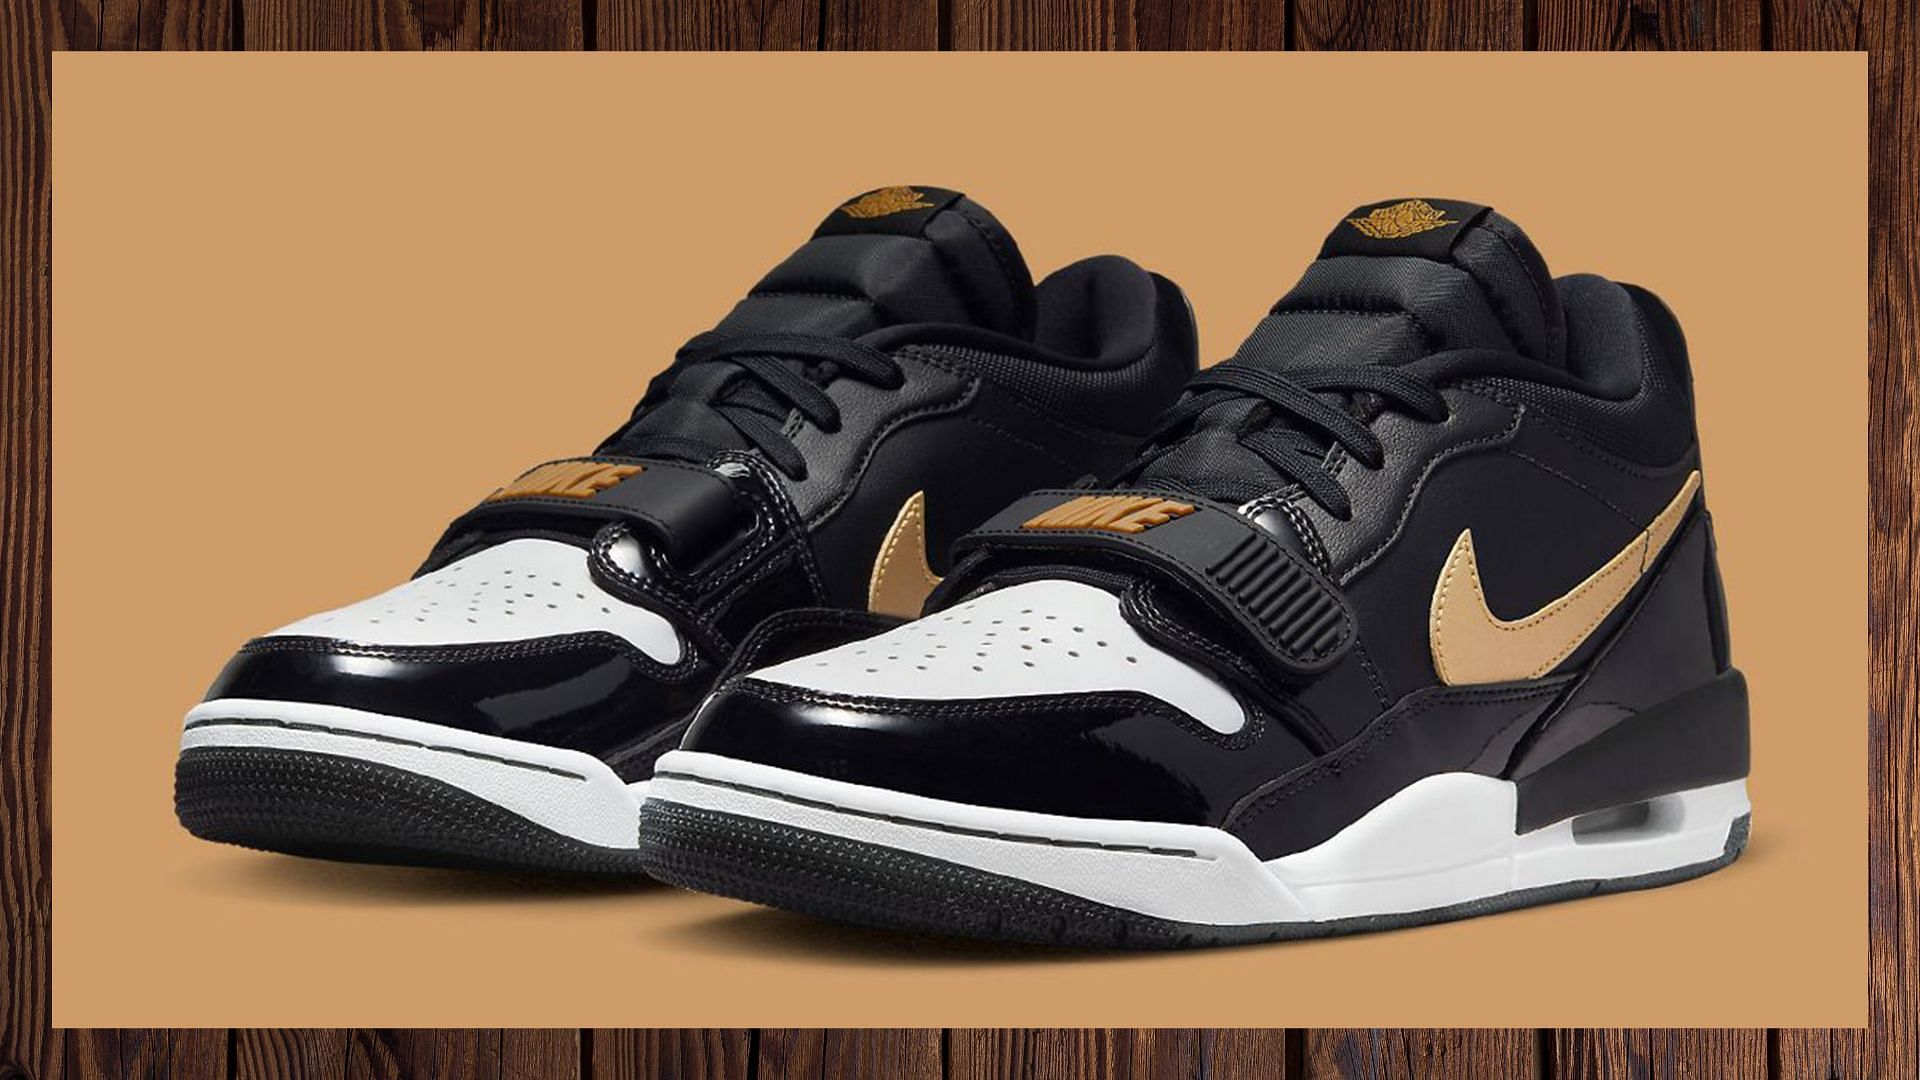 Where to buy Jordan Legacy 312 Low Black and Gold shoes? Price and more